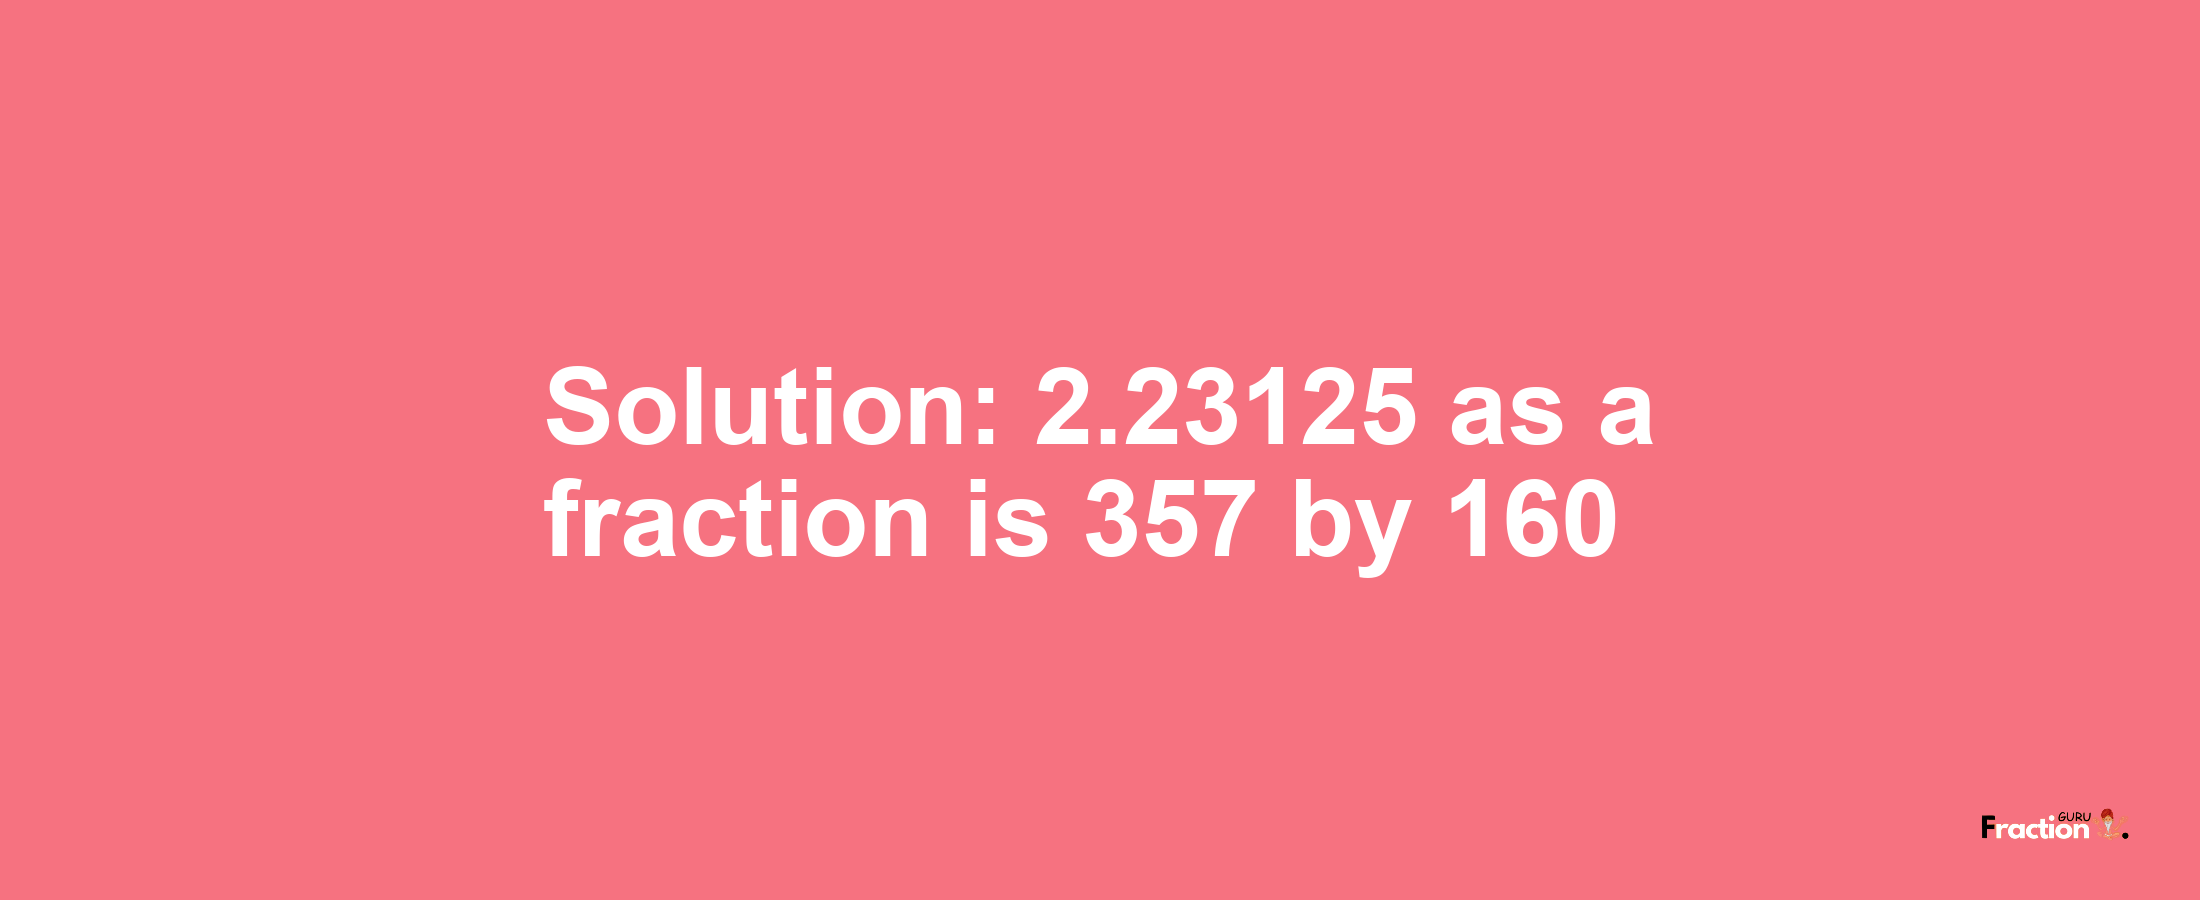 Solution:2.23125 as a fraction is 357/160